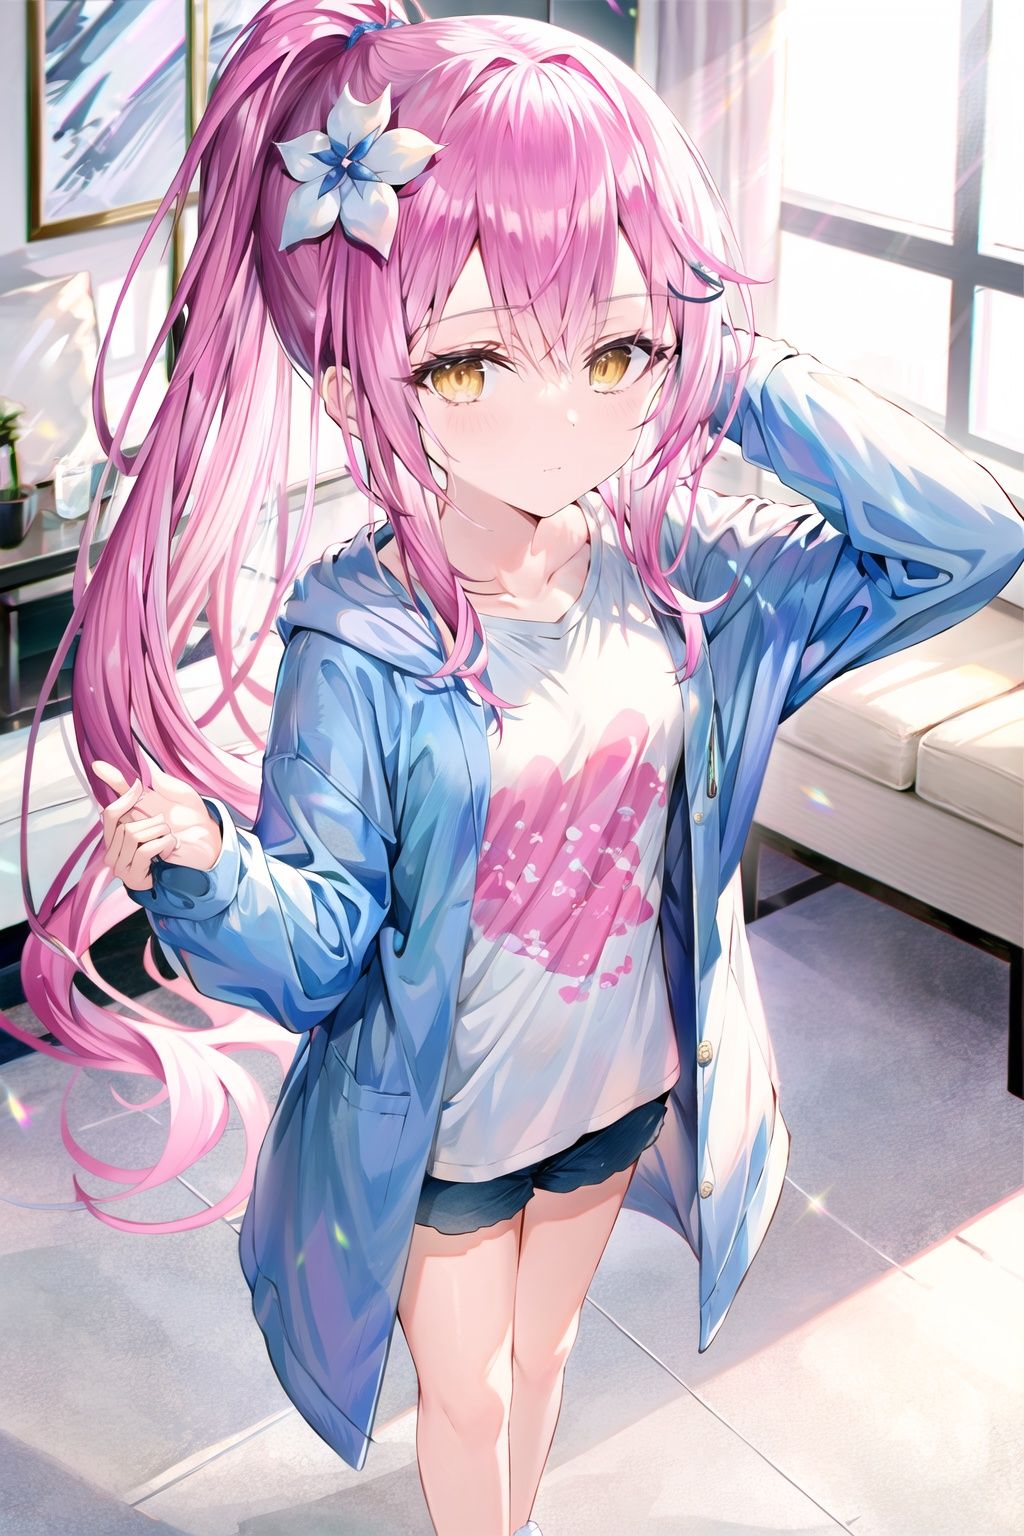 1petite loli,solo.pink hair,long pink hair,(yellow eyes),hair flower,fipped hair,high ponytail,loose over_sized Casual T-shirt,white shirt,hoodie coat,bare legs,slippers;relaxed,one-eye_closed,adjusting hair,looking at viewer,standing.